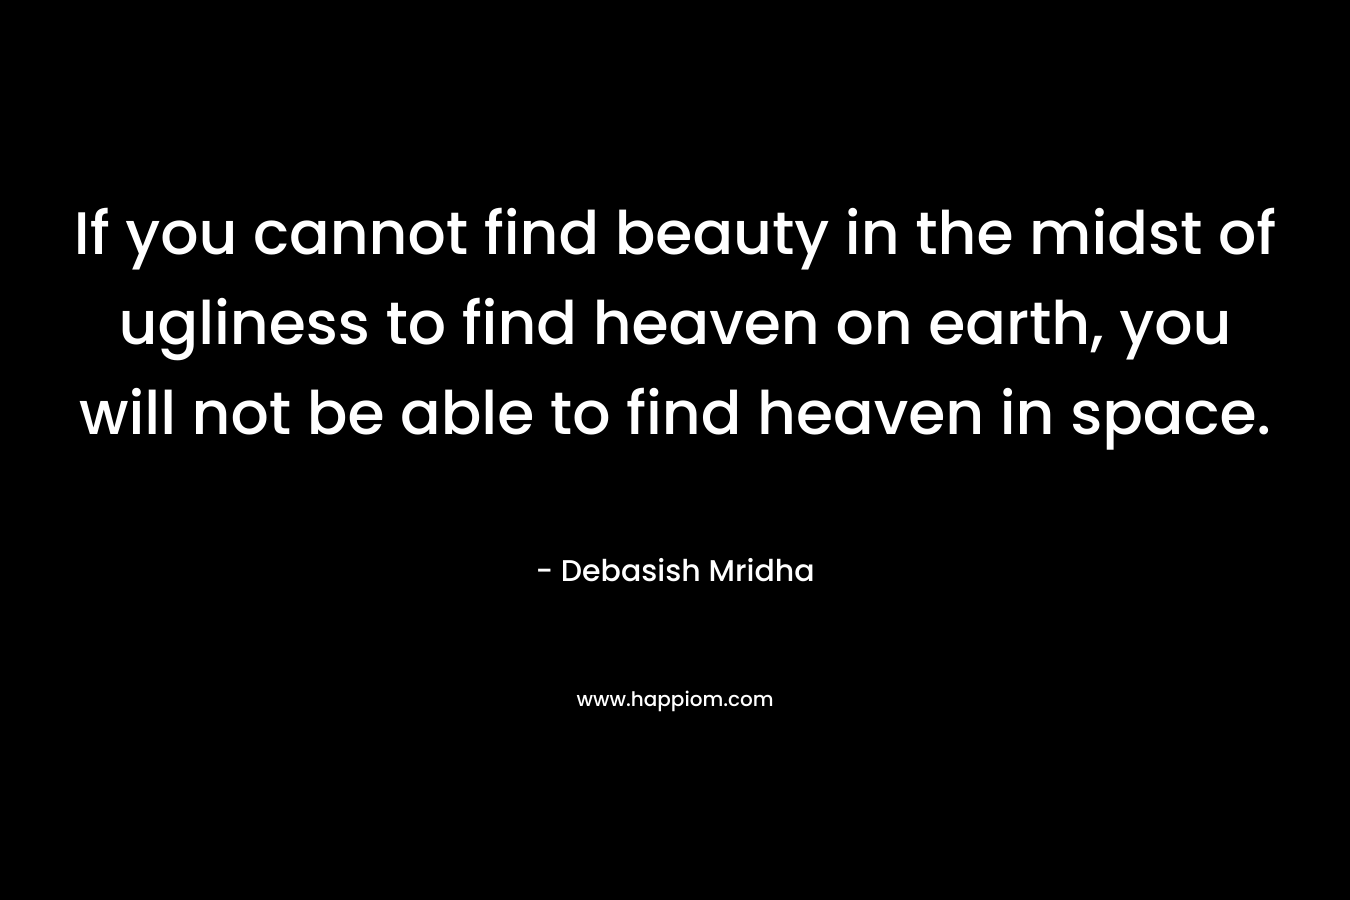 If you cannot find beauty in the midst of ugliness to find heaven on earth, you will not be able to find heaven in space. – Debasish Mridha